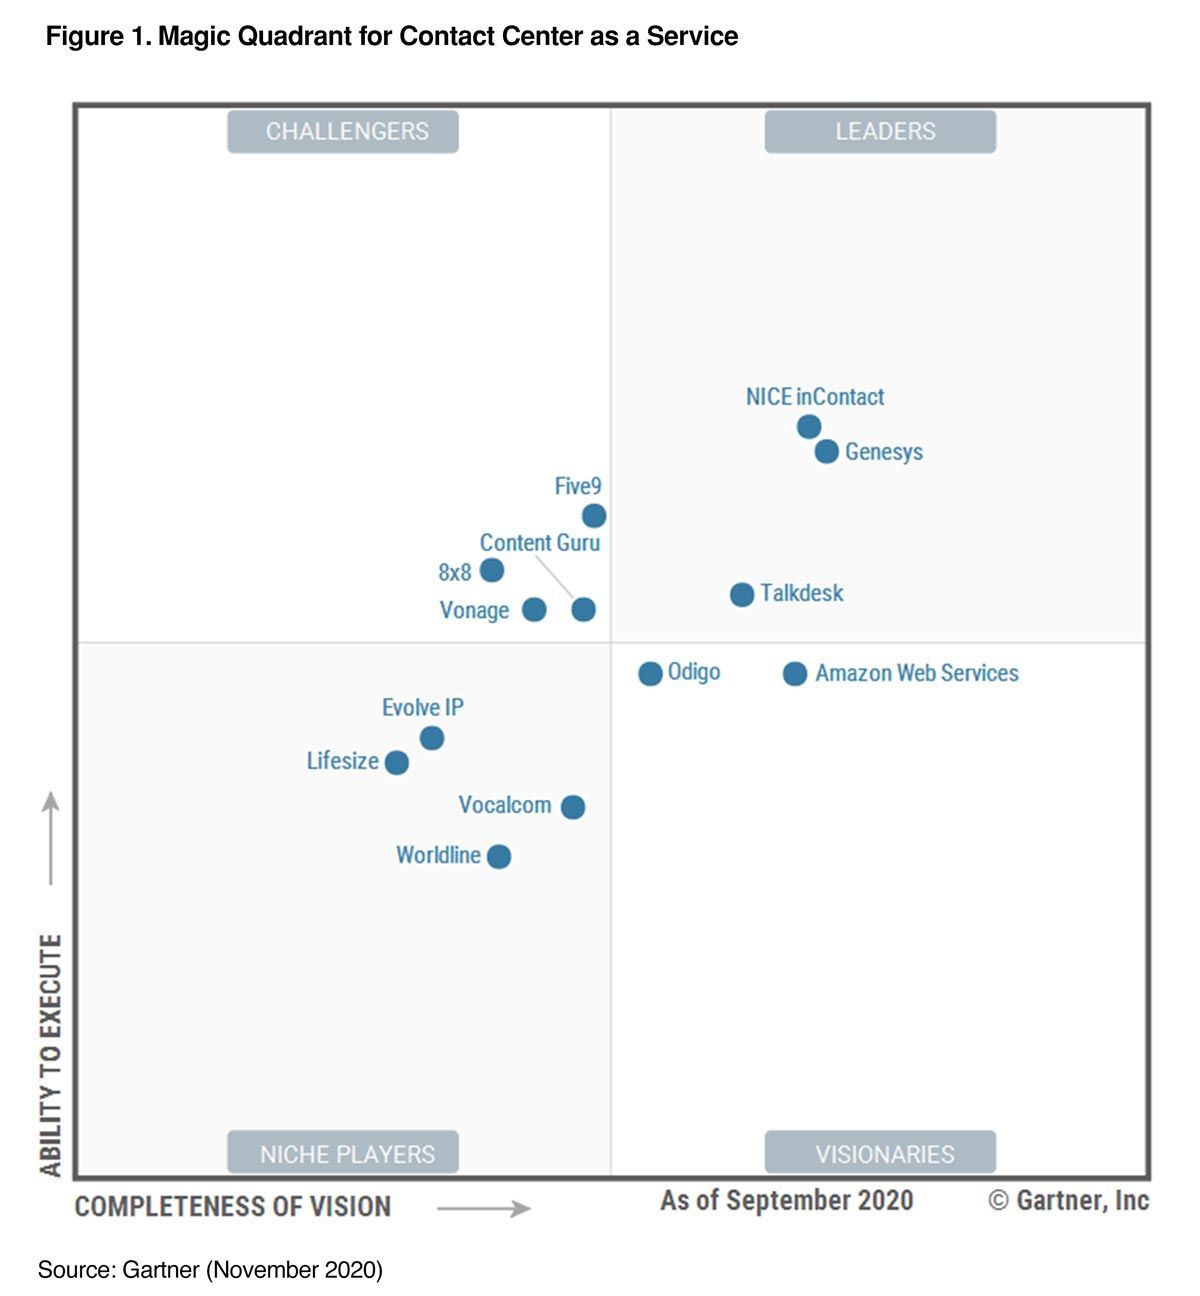 Gartner Names NICE inContact a Leader in the 2020 Magic Quadrant for Contact Center as a Service